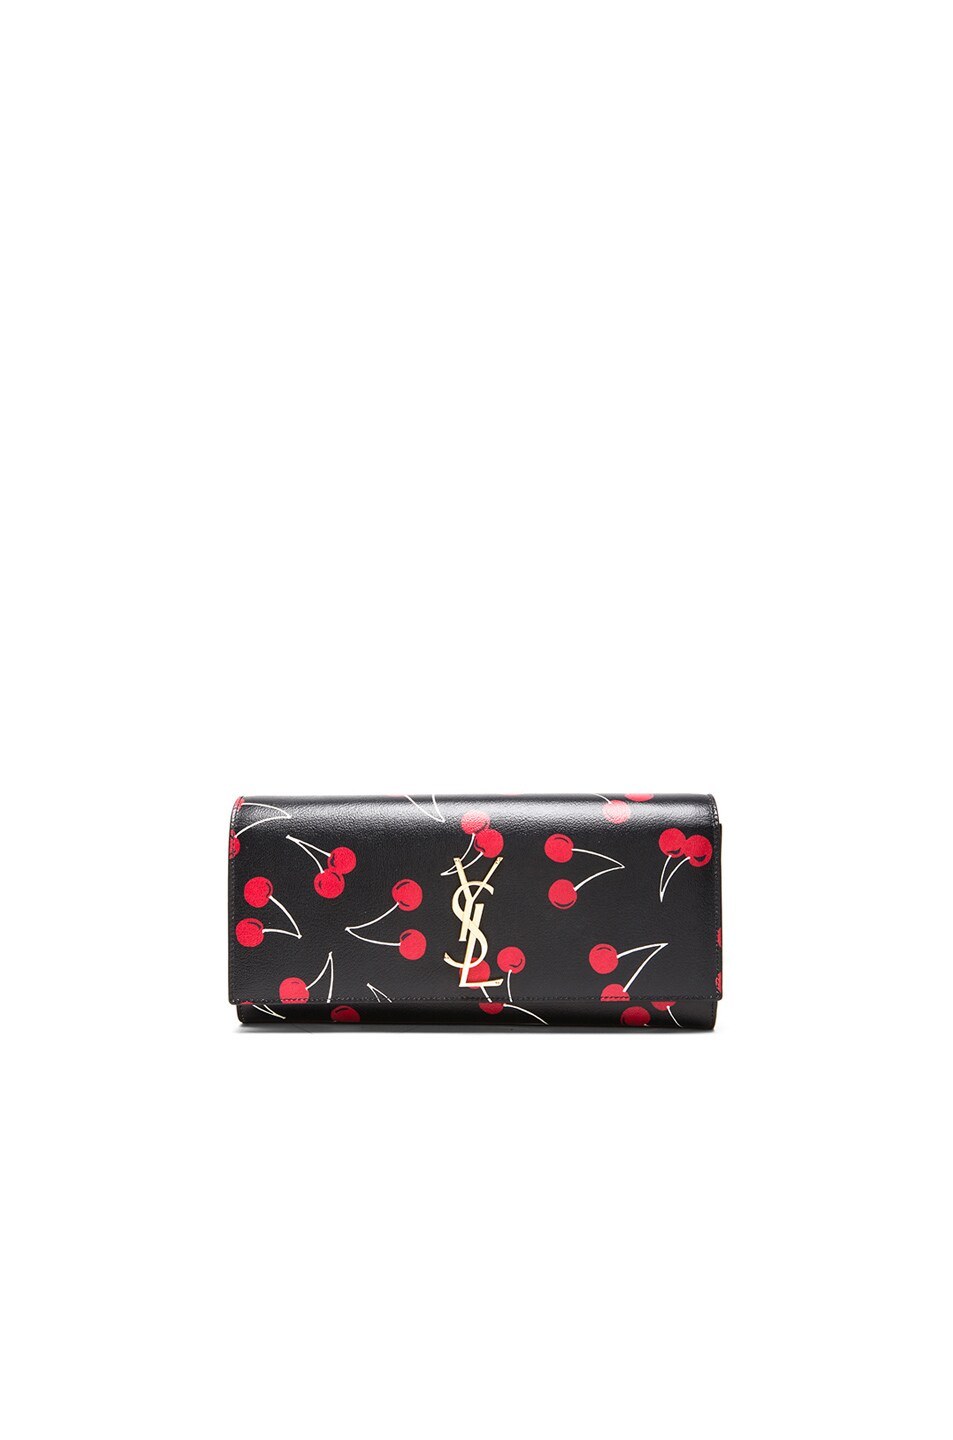 Image 1 of Saint Laurent Cherry Print Monogramme Clutch in Black, Red & White